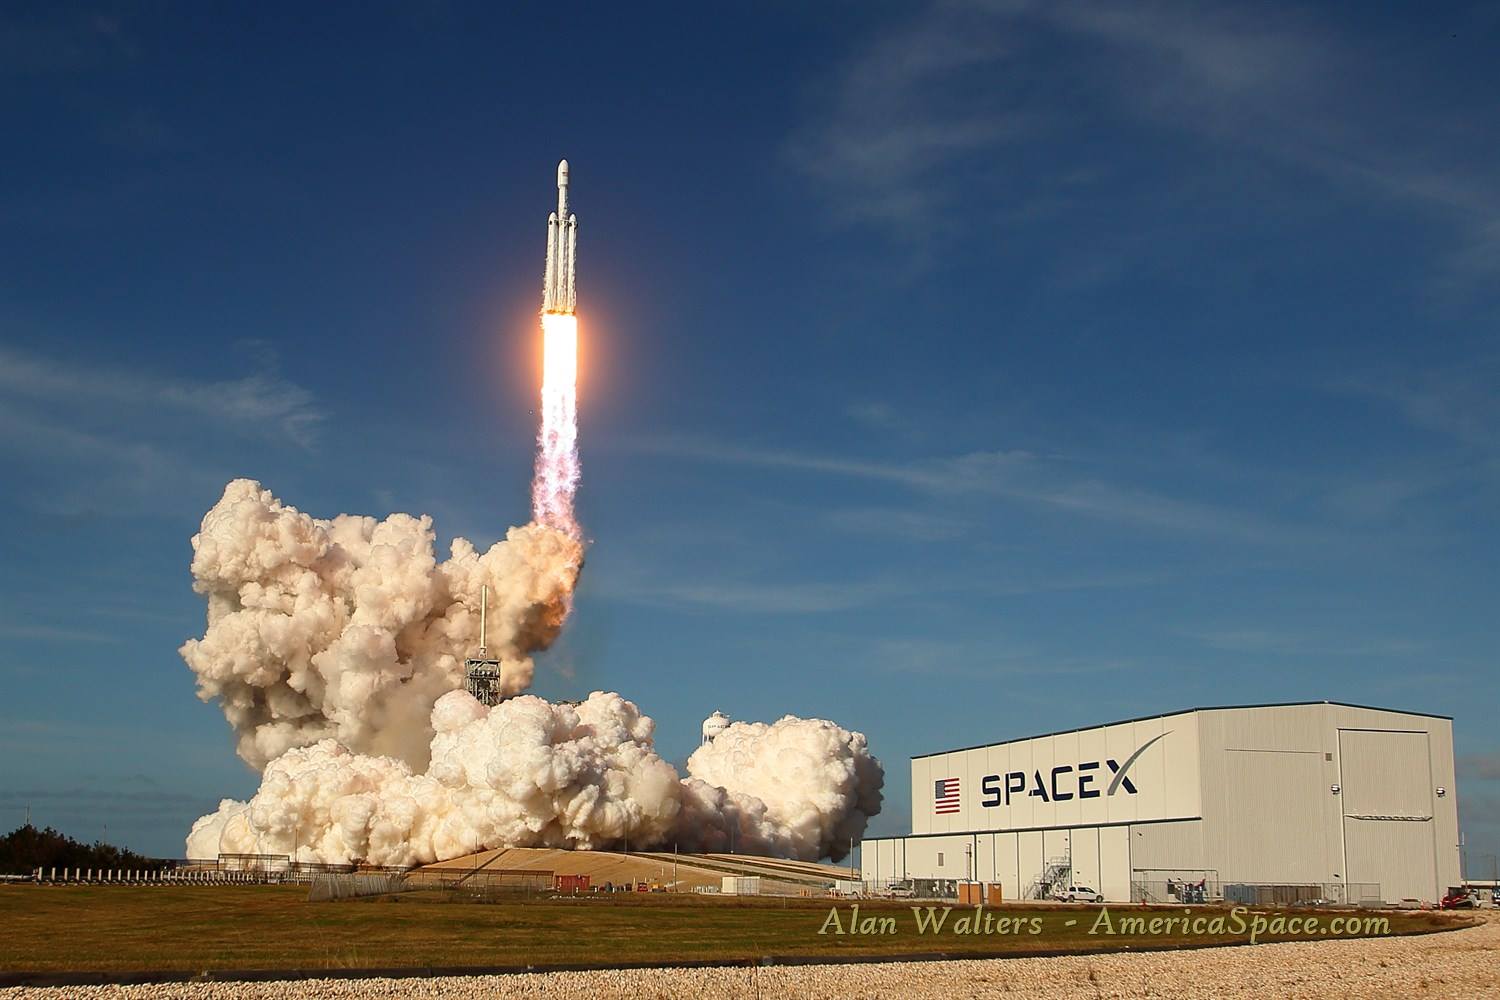 Long-Awaited Maiden Voyage of Falcon Heavy Brings Deep-Space Exploration Closer ...1500 x 1000